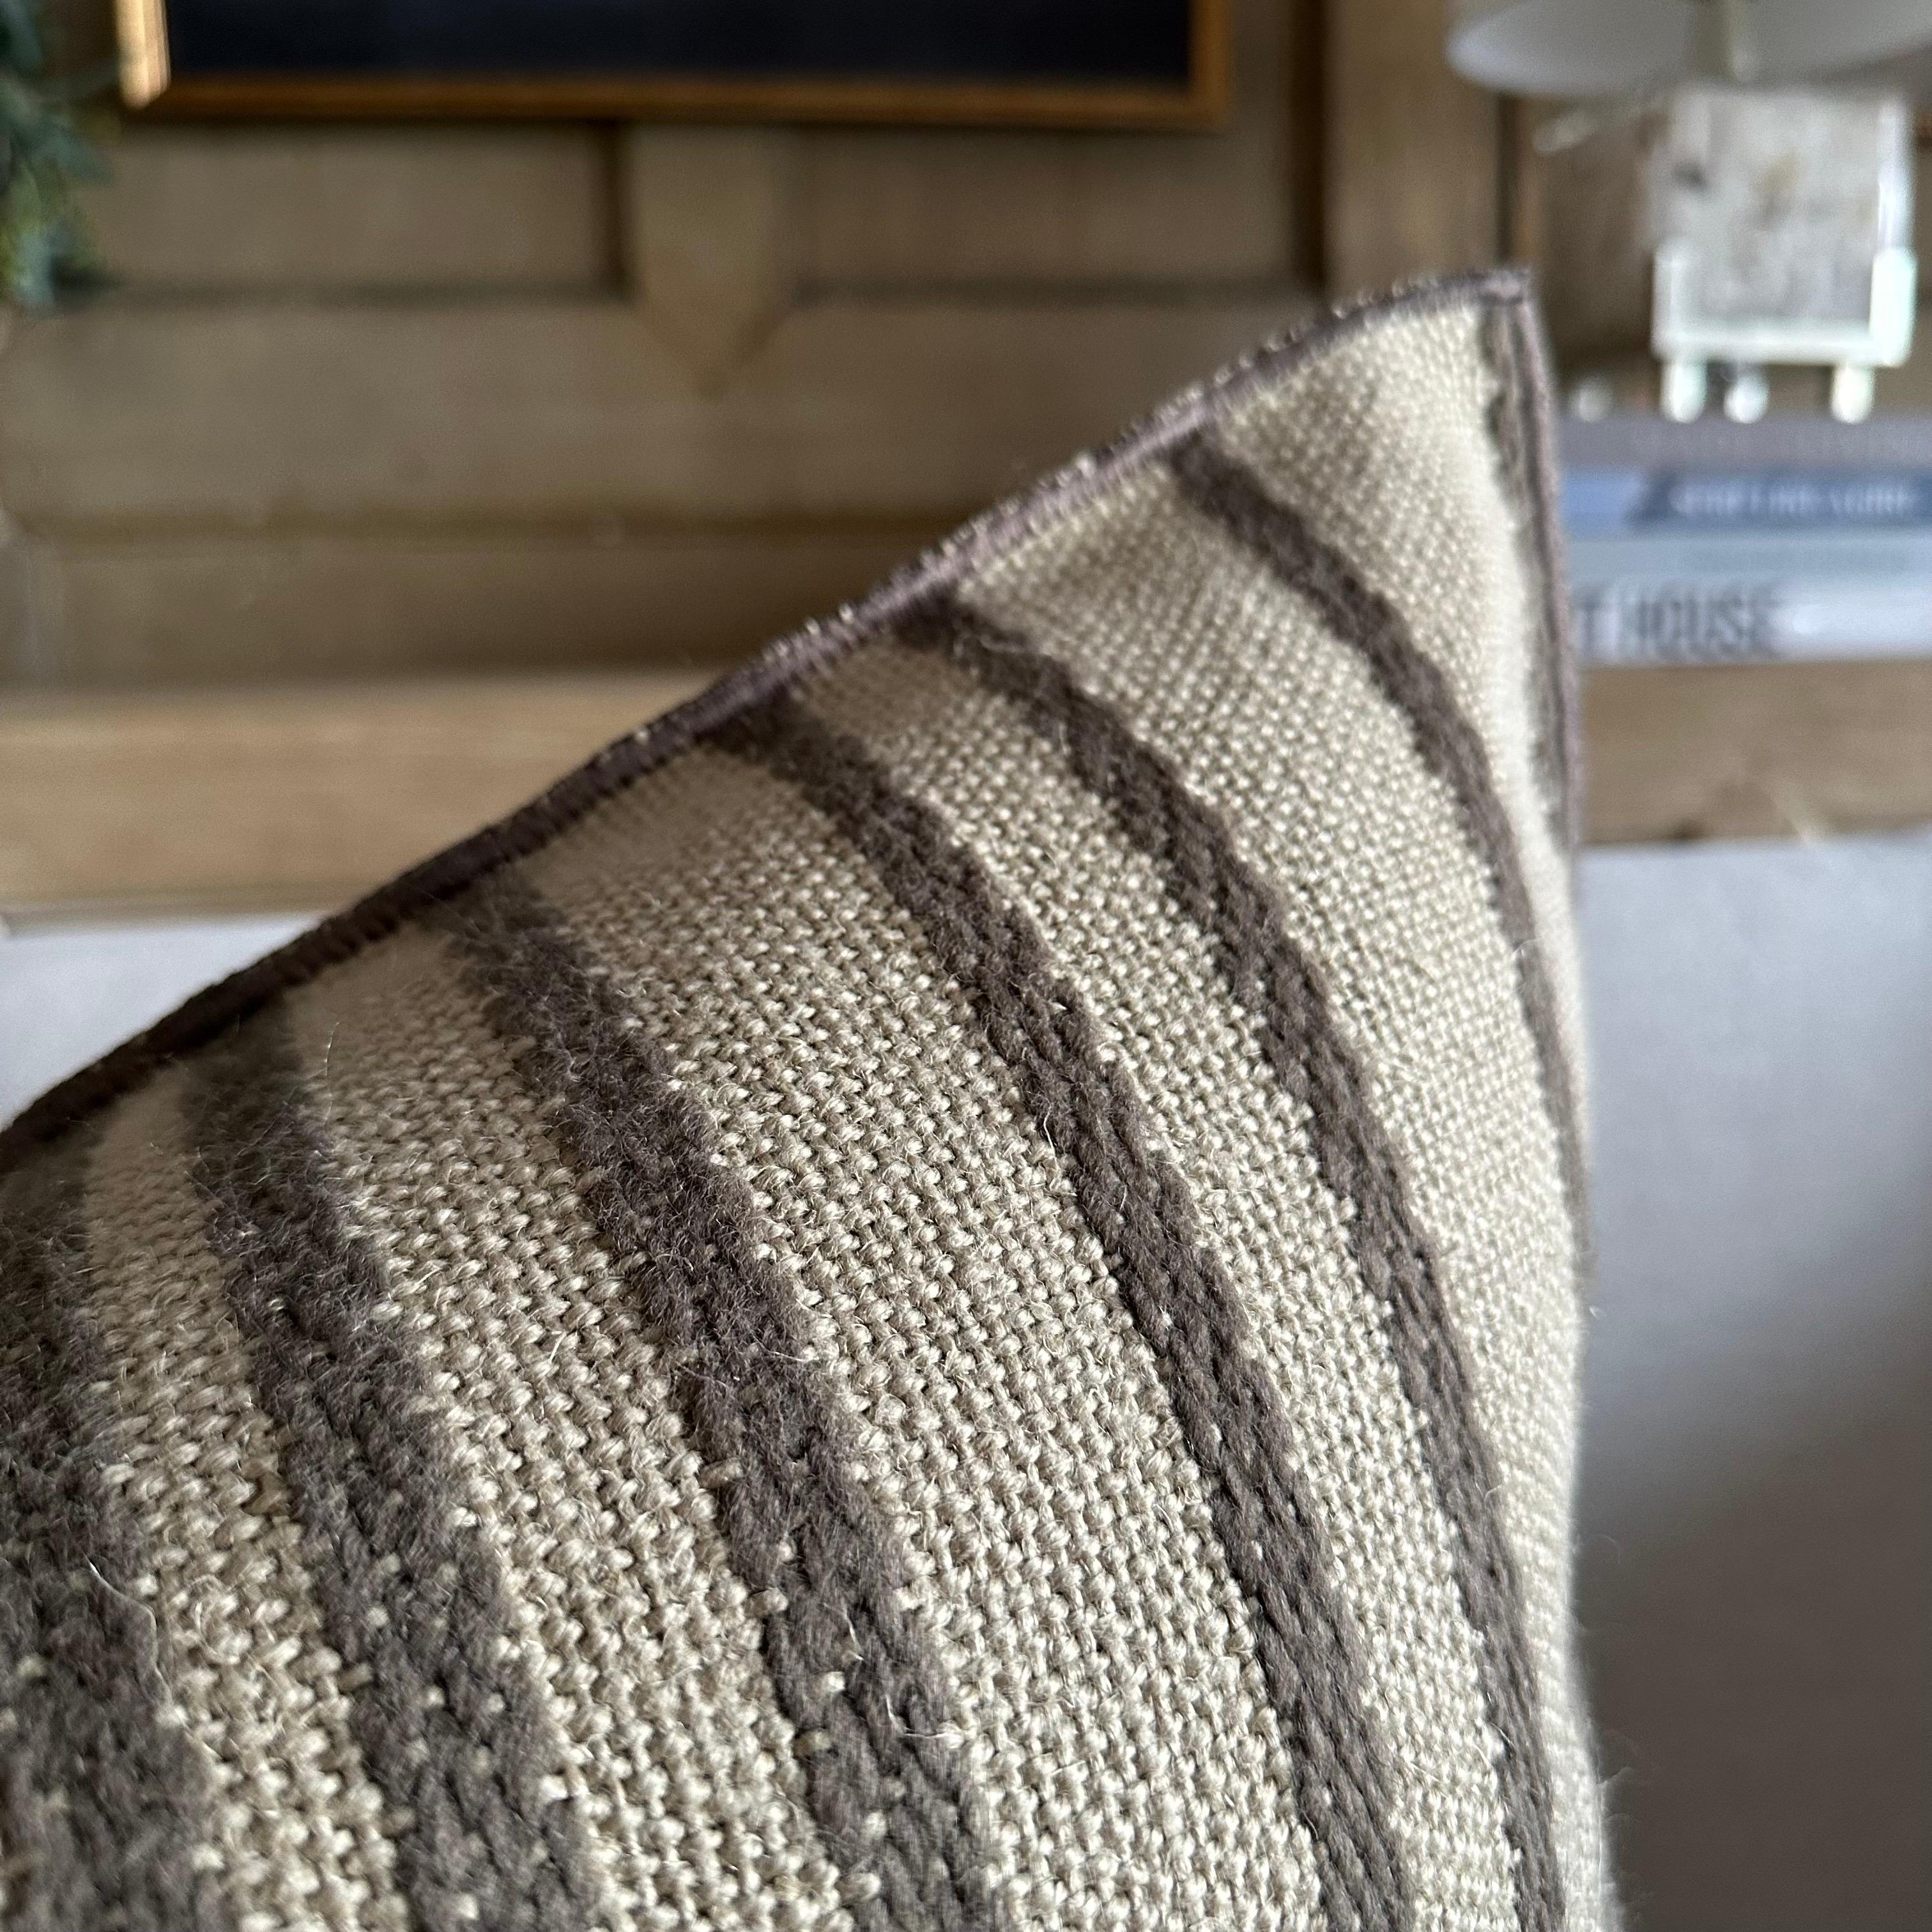 MDV Embroidered Myre Rayure 
Color: Ecorce (a bronze with gray hues)
Size 20x27
A beautiful natural flax, heavy weight linen, with a deep dark gray bronze embroidered stripe pattern. 
These pillows are crafted from a luxurious wool, and linen blend,